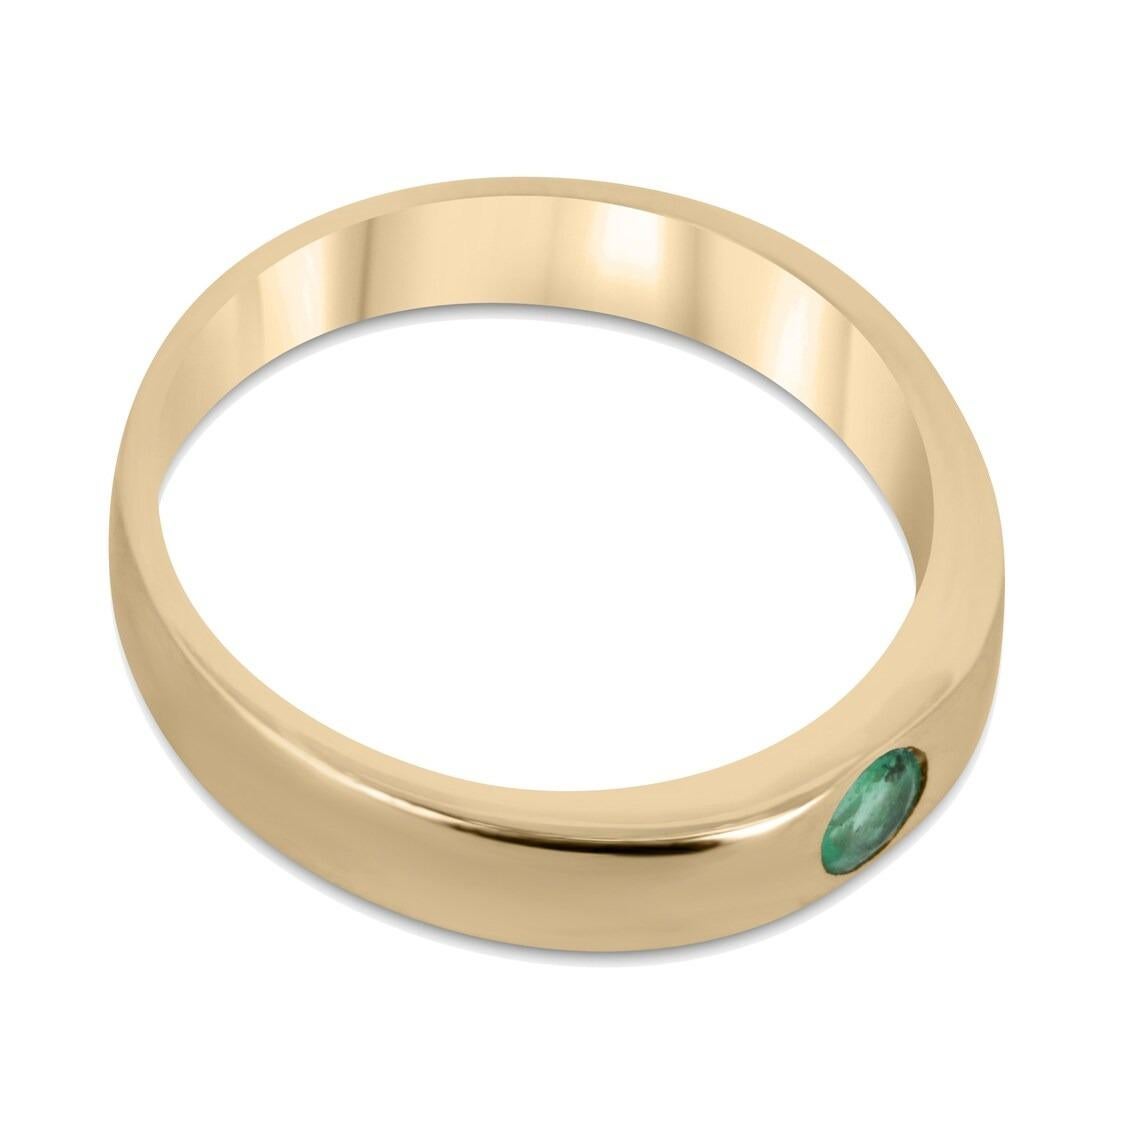 This solitaire emerald band ring features a stunning round-cut emerald stone set in the center of a 3.9mm band crafted from high-quality 14k gold. The emerald boasts a medium green color with good luster and is securely held in place by a bezel